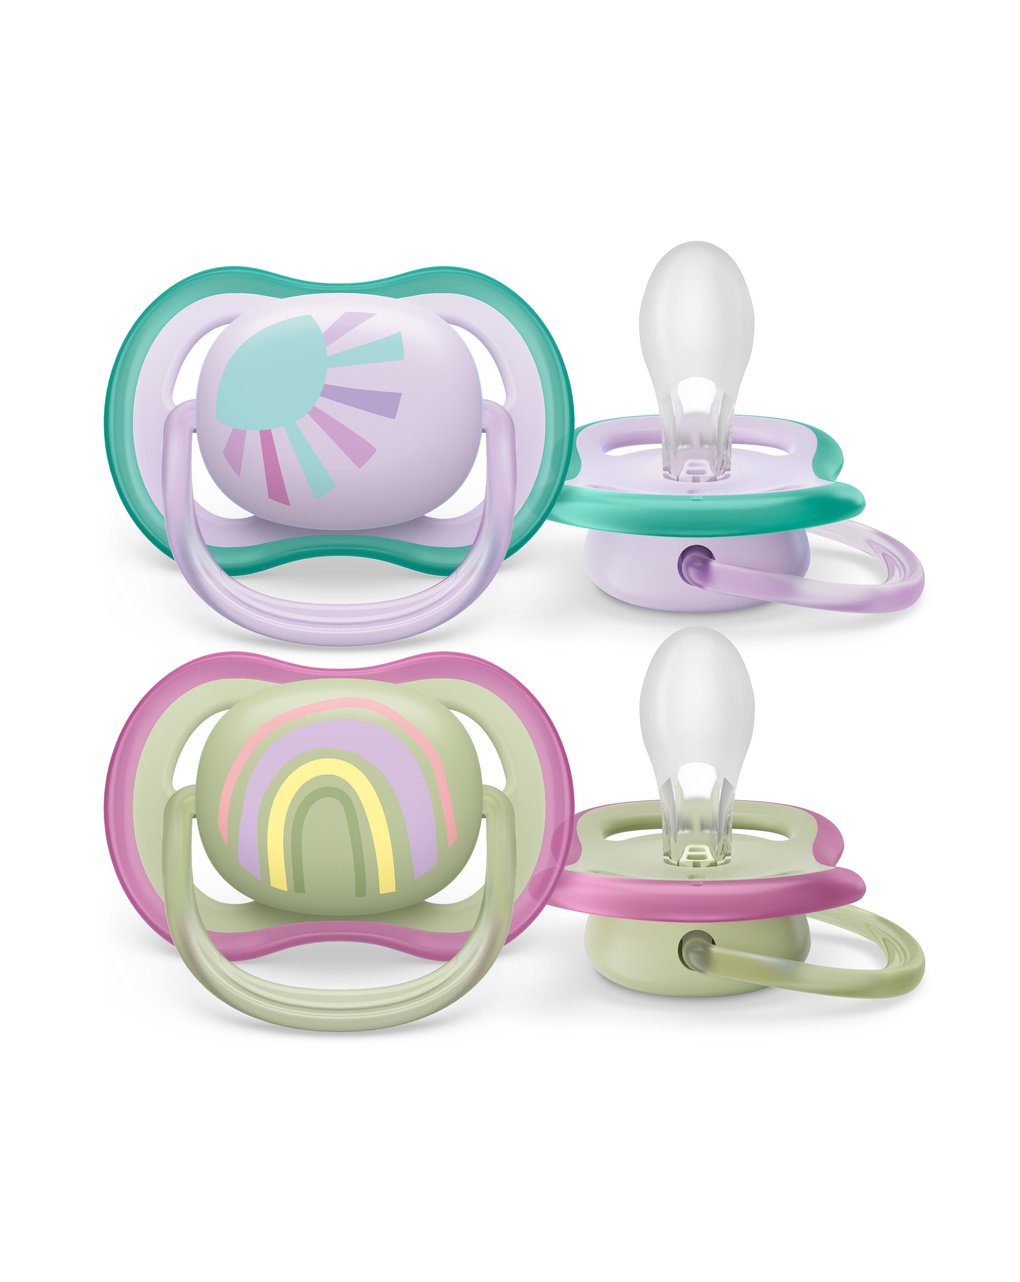 2 chupetes ultra air 0-6 meses verde/rosa - philips avent